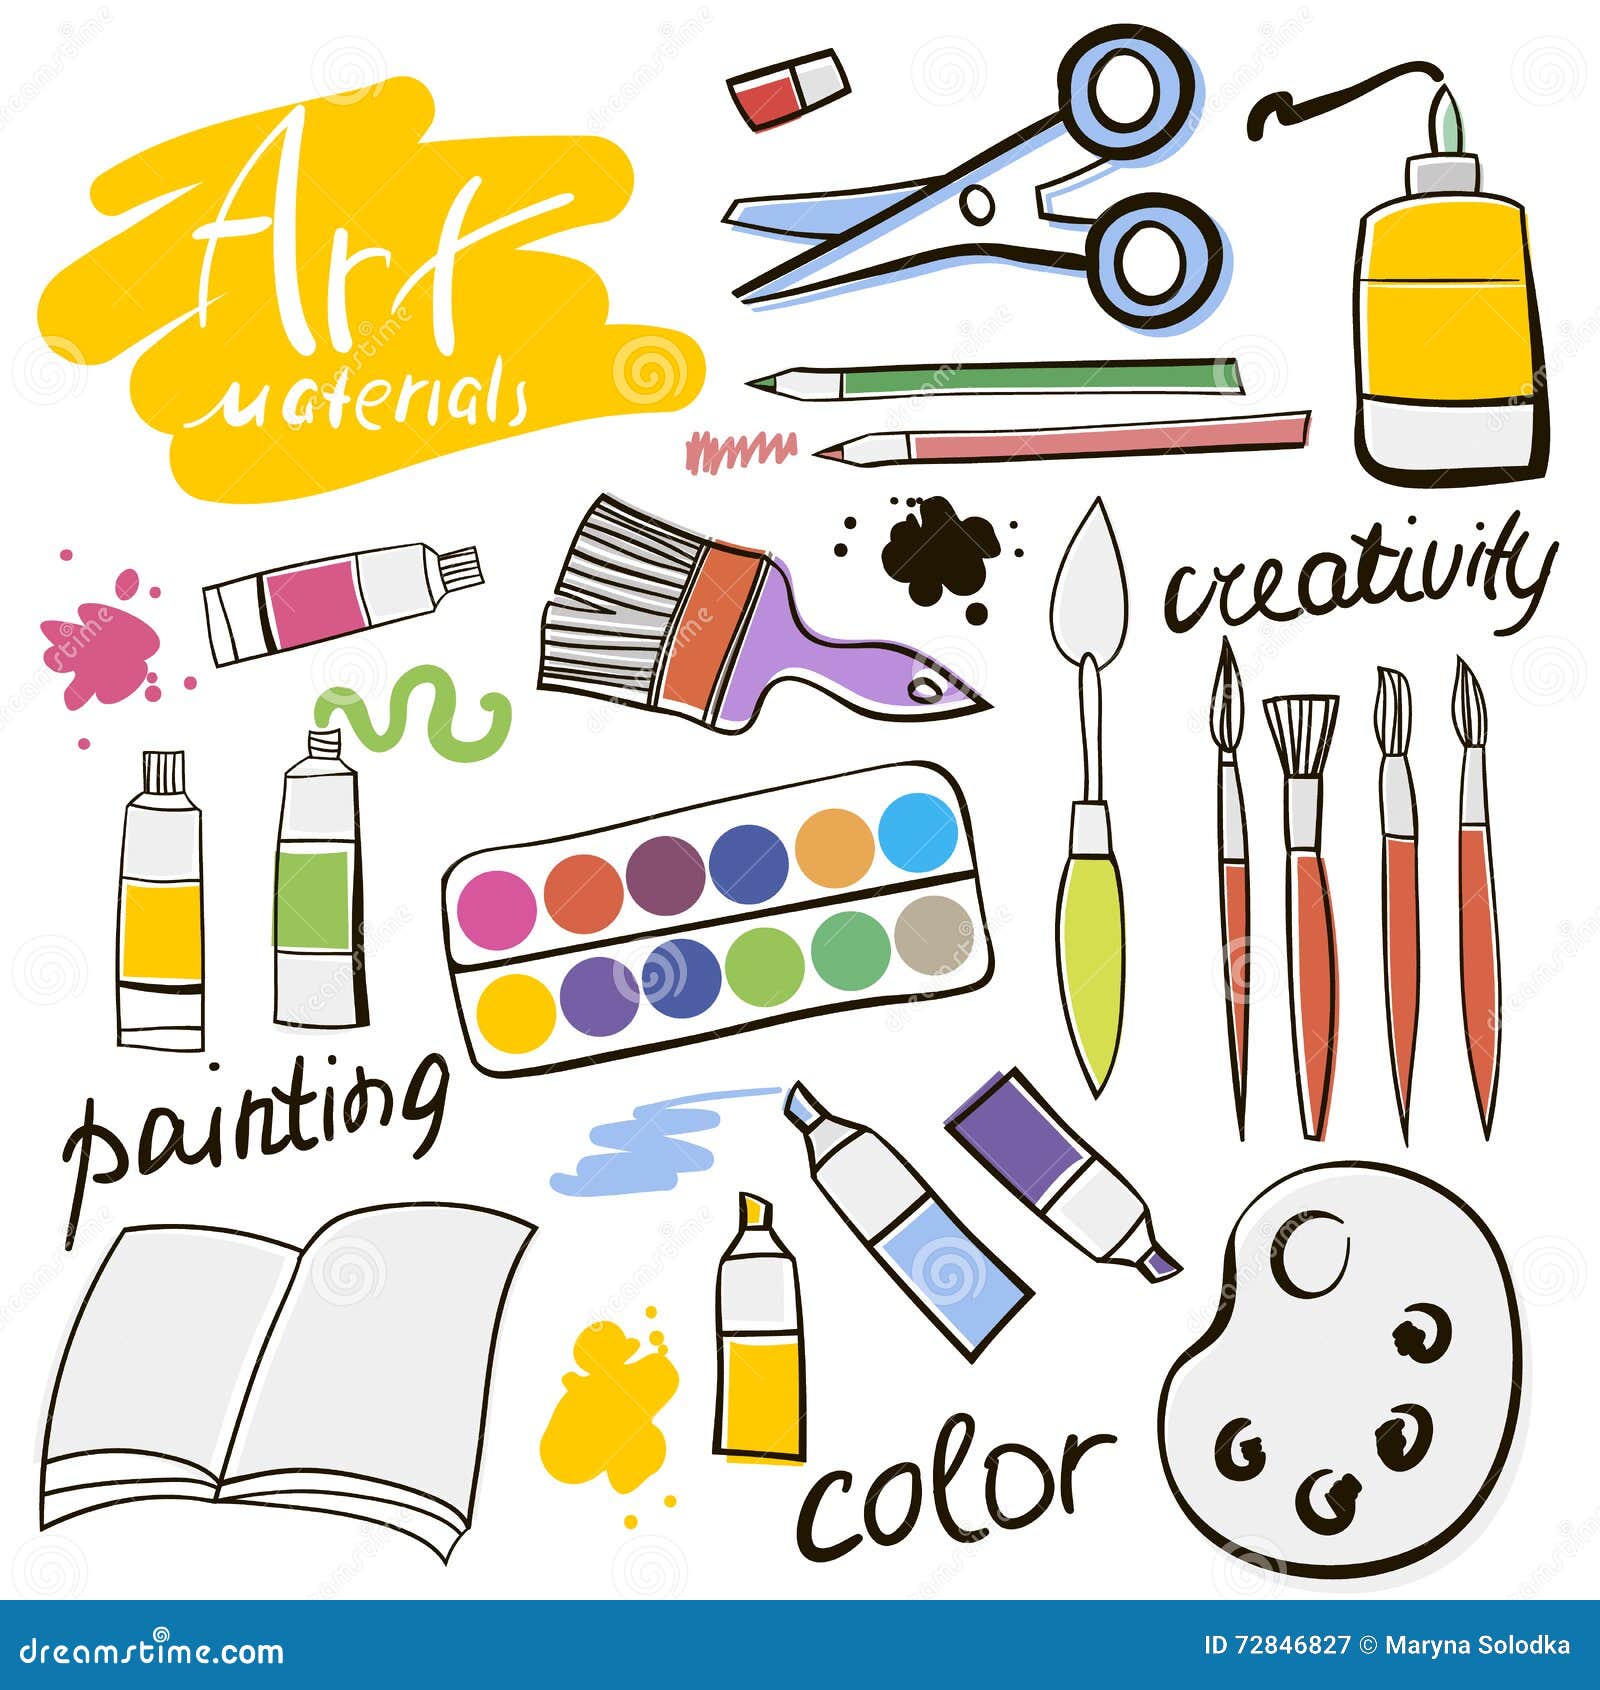 https://thumbs.dreamstime.com/z/doodle-colored-art-materials-collection-hand-drawn-art-icons-set-vector-illustration-72846827.jpg